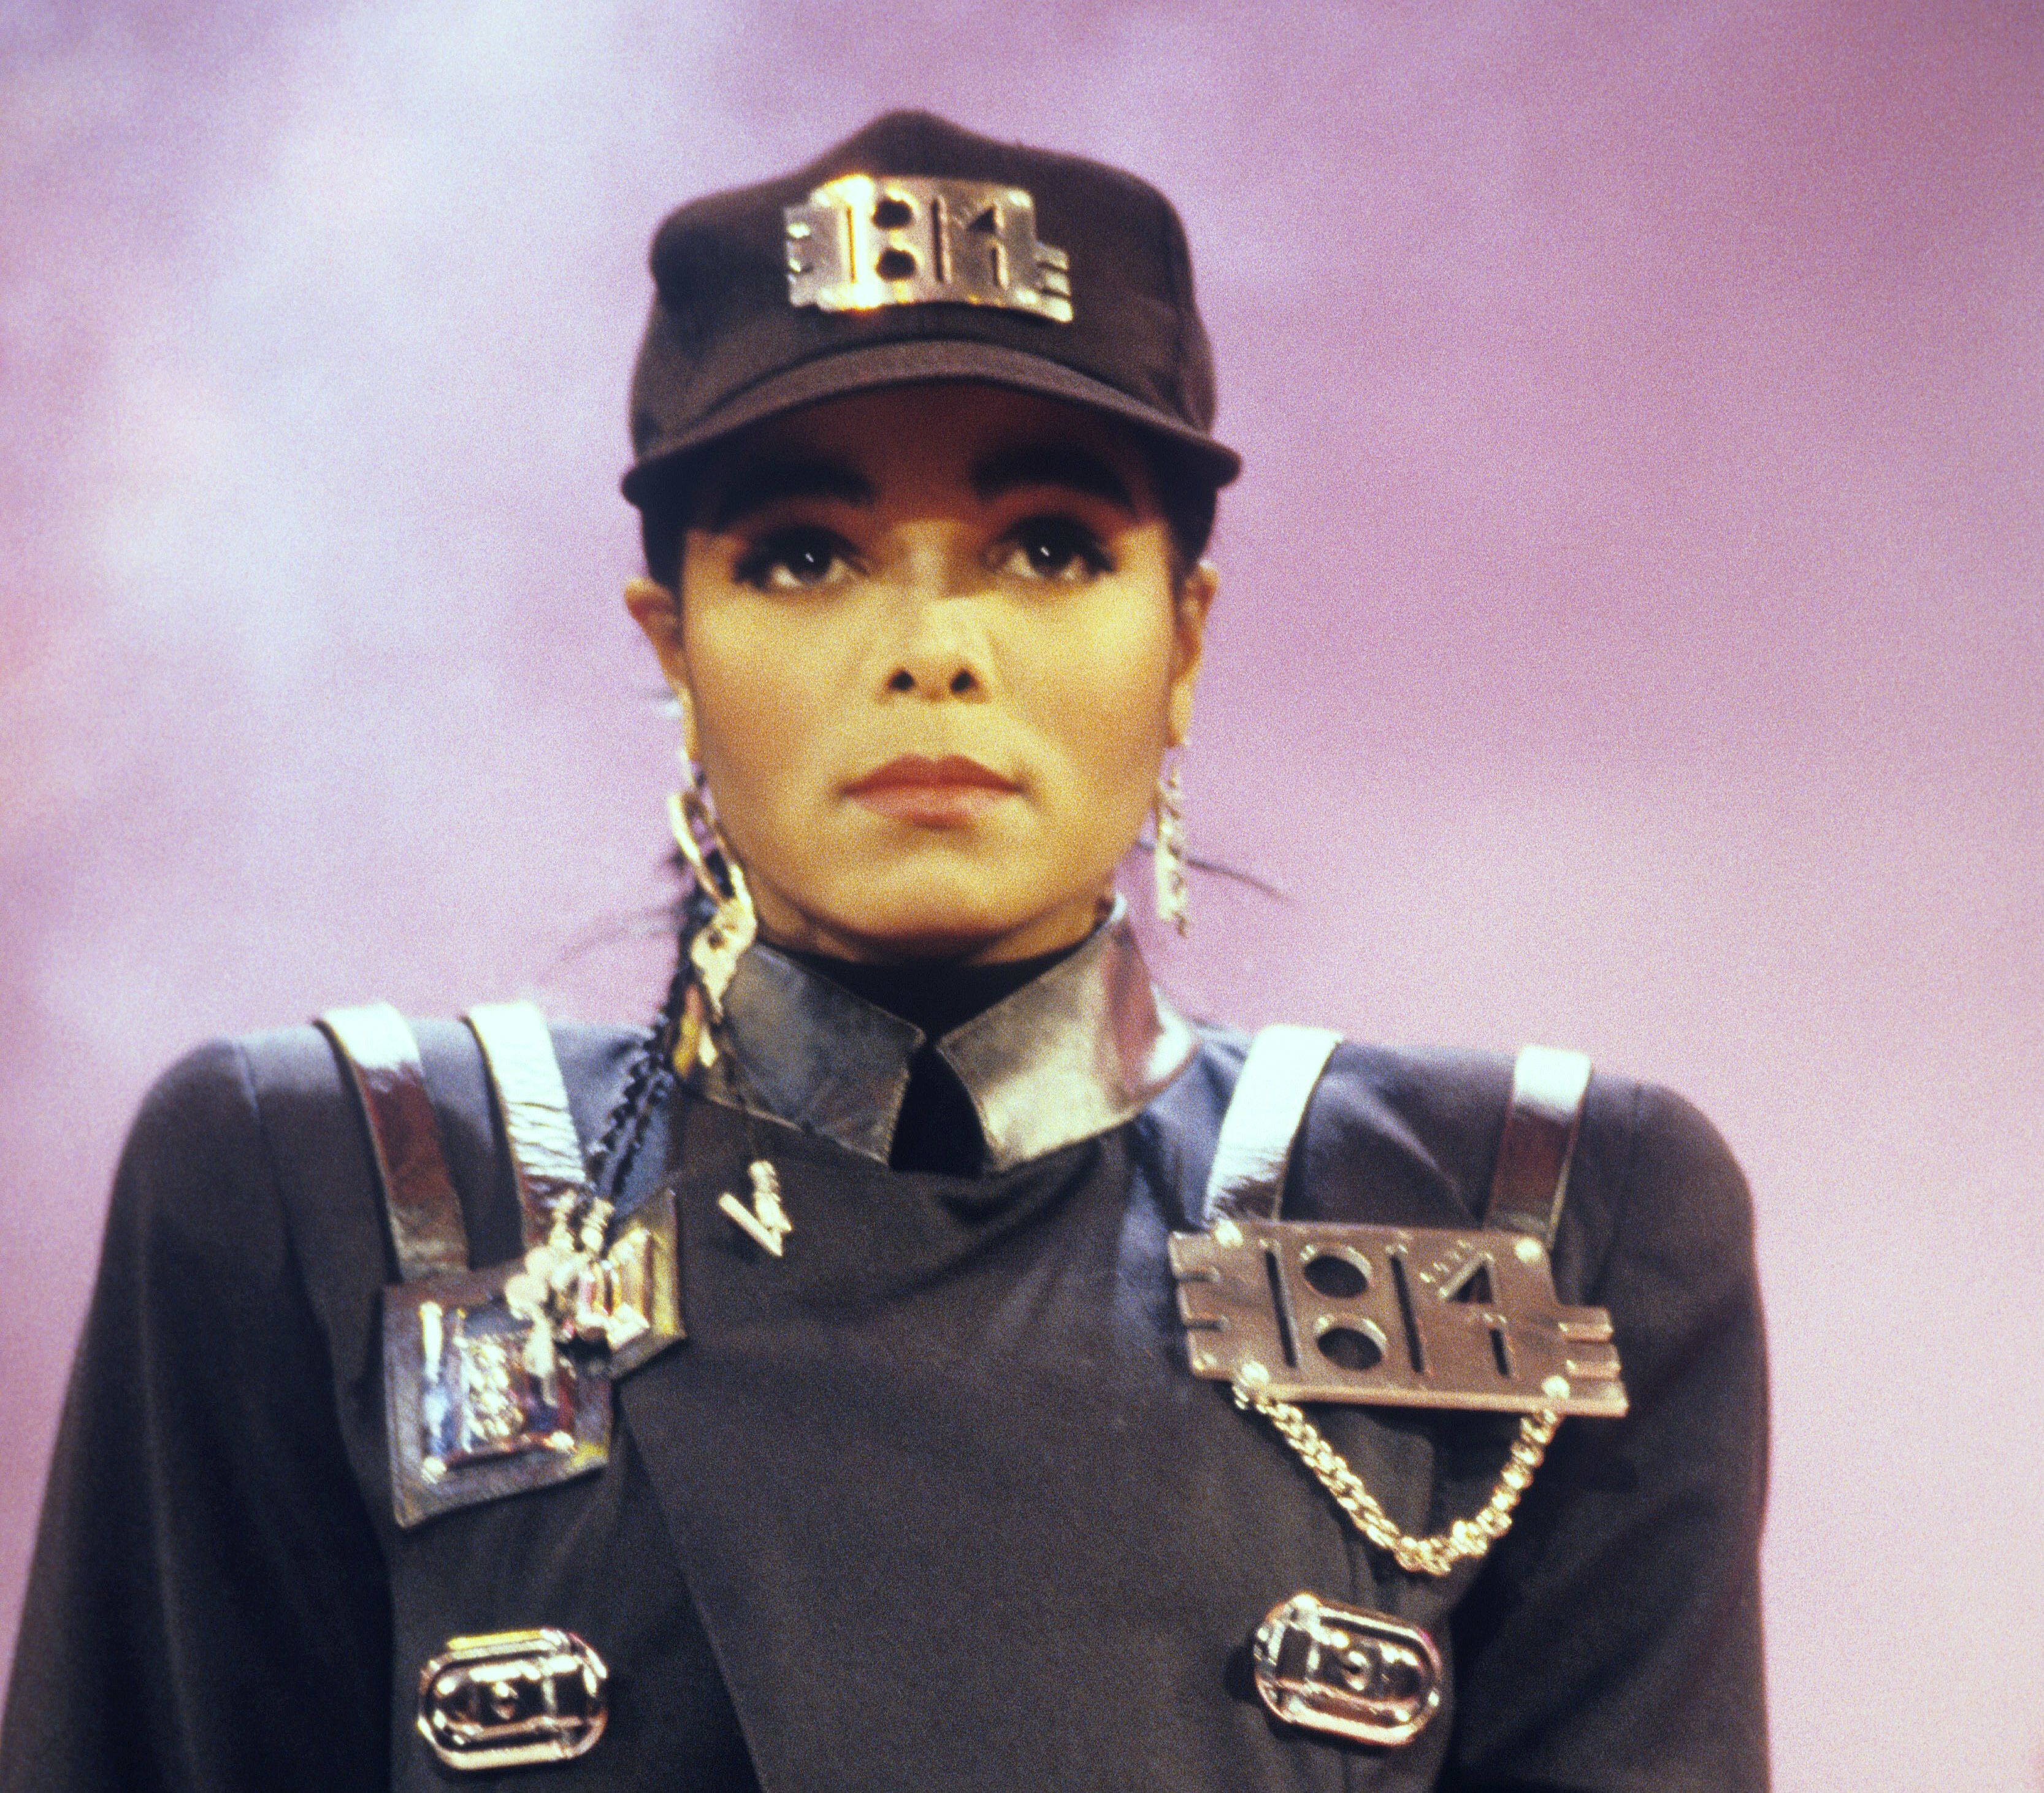 30 Years Later, Janet Jackson's 'Rhythm Nation' Still Speaks to the Times